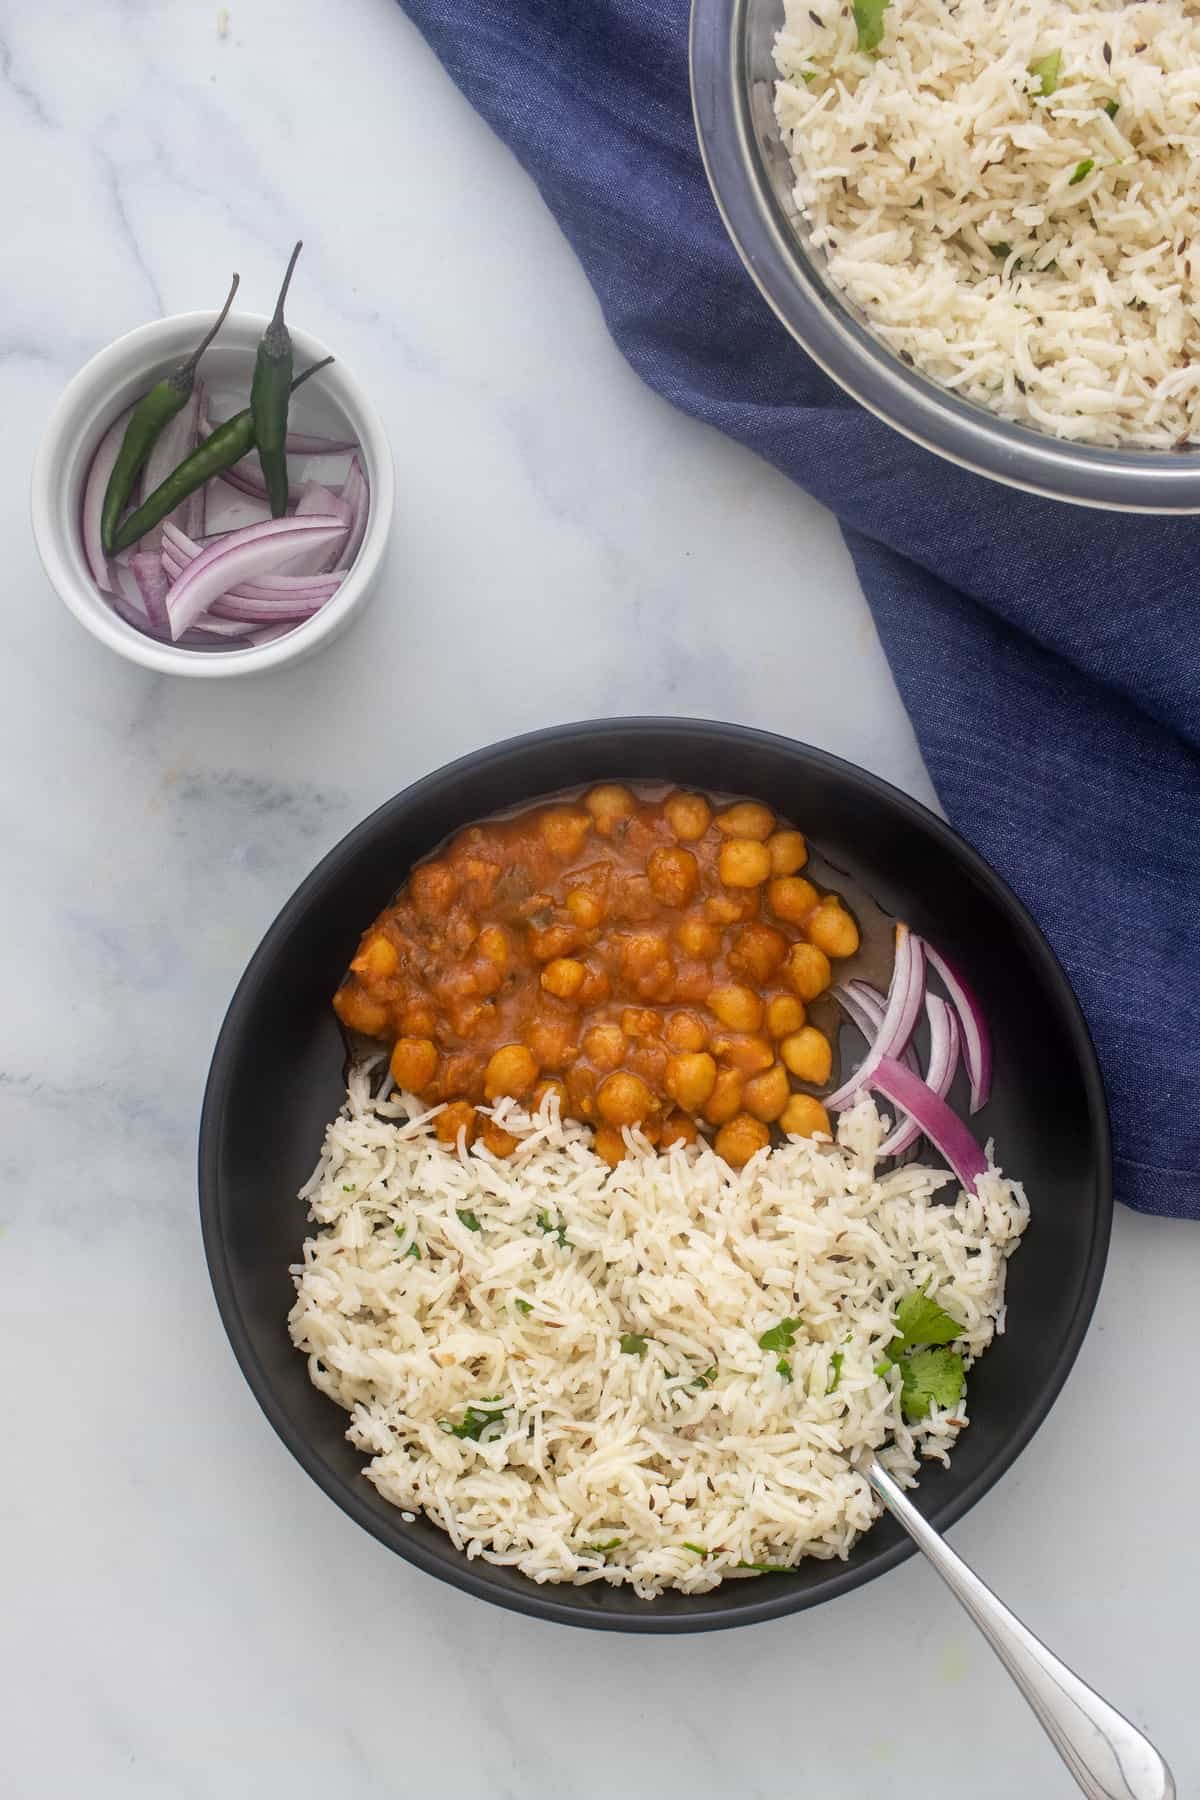 Plate of jeera rice served along with chana masala and red onions